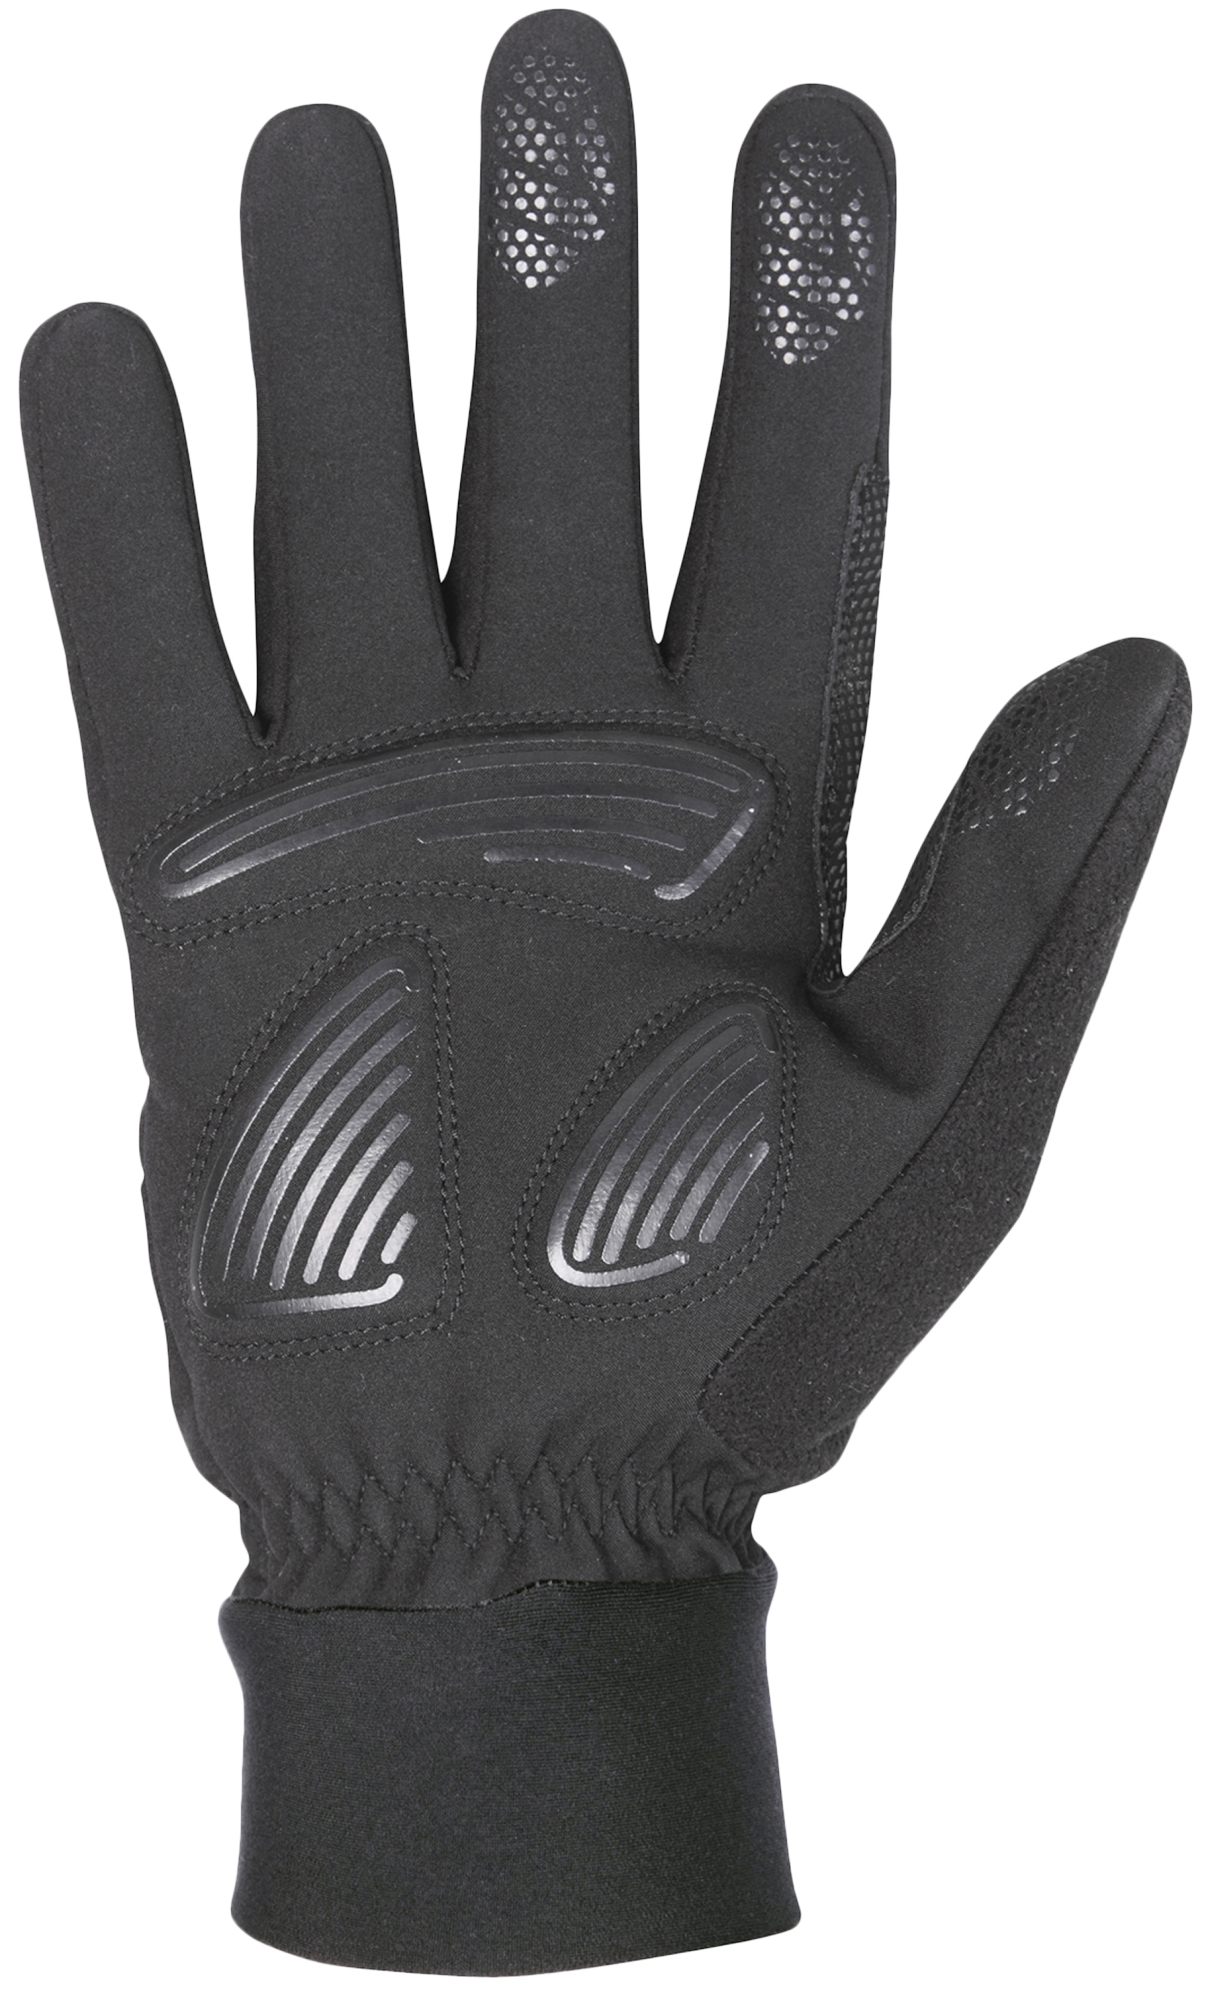 Sports insulated gloves